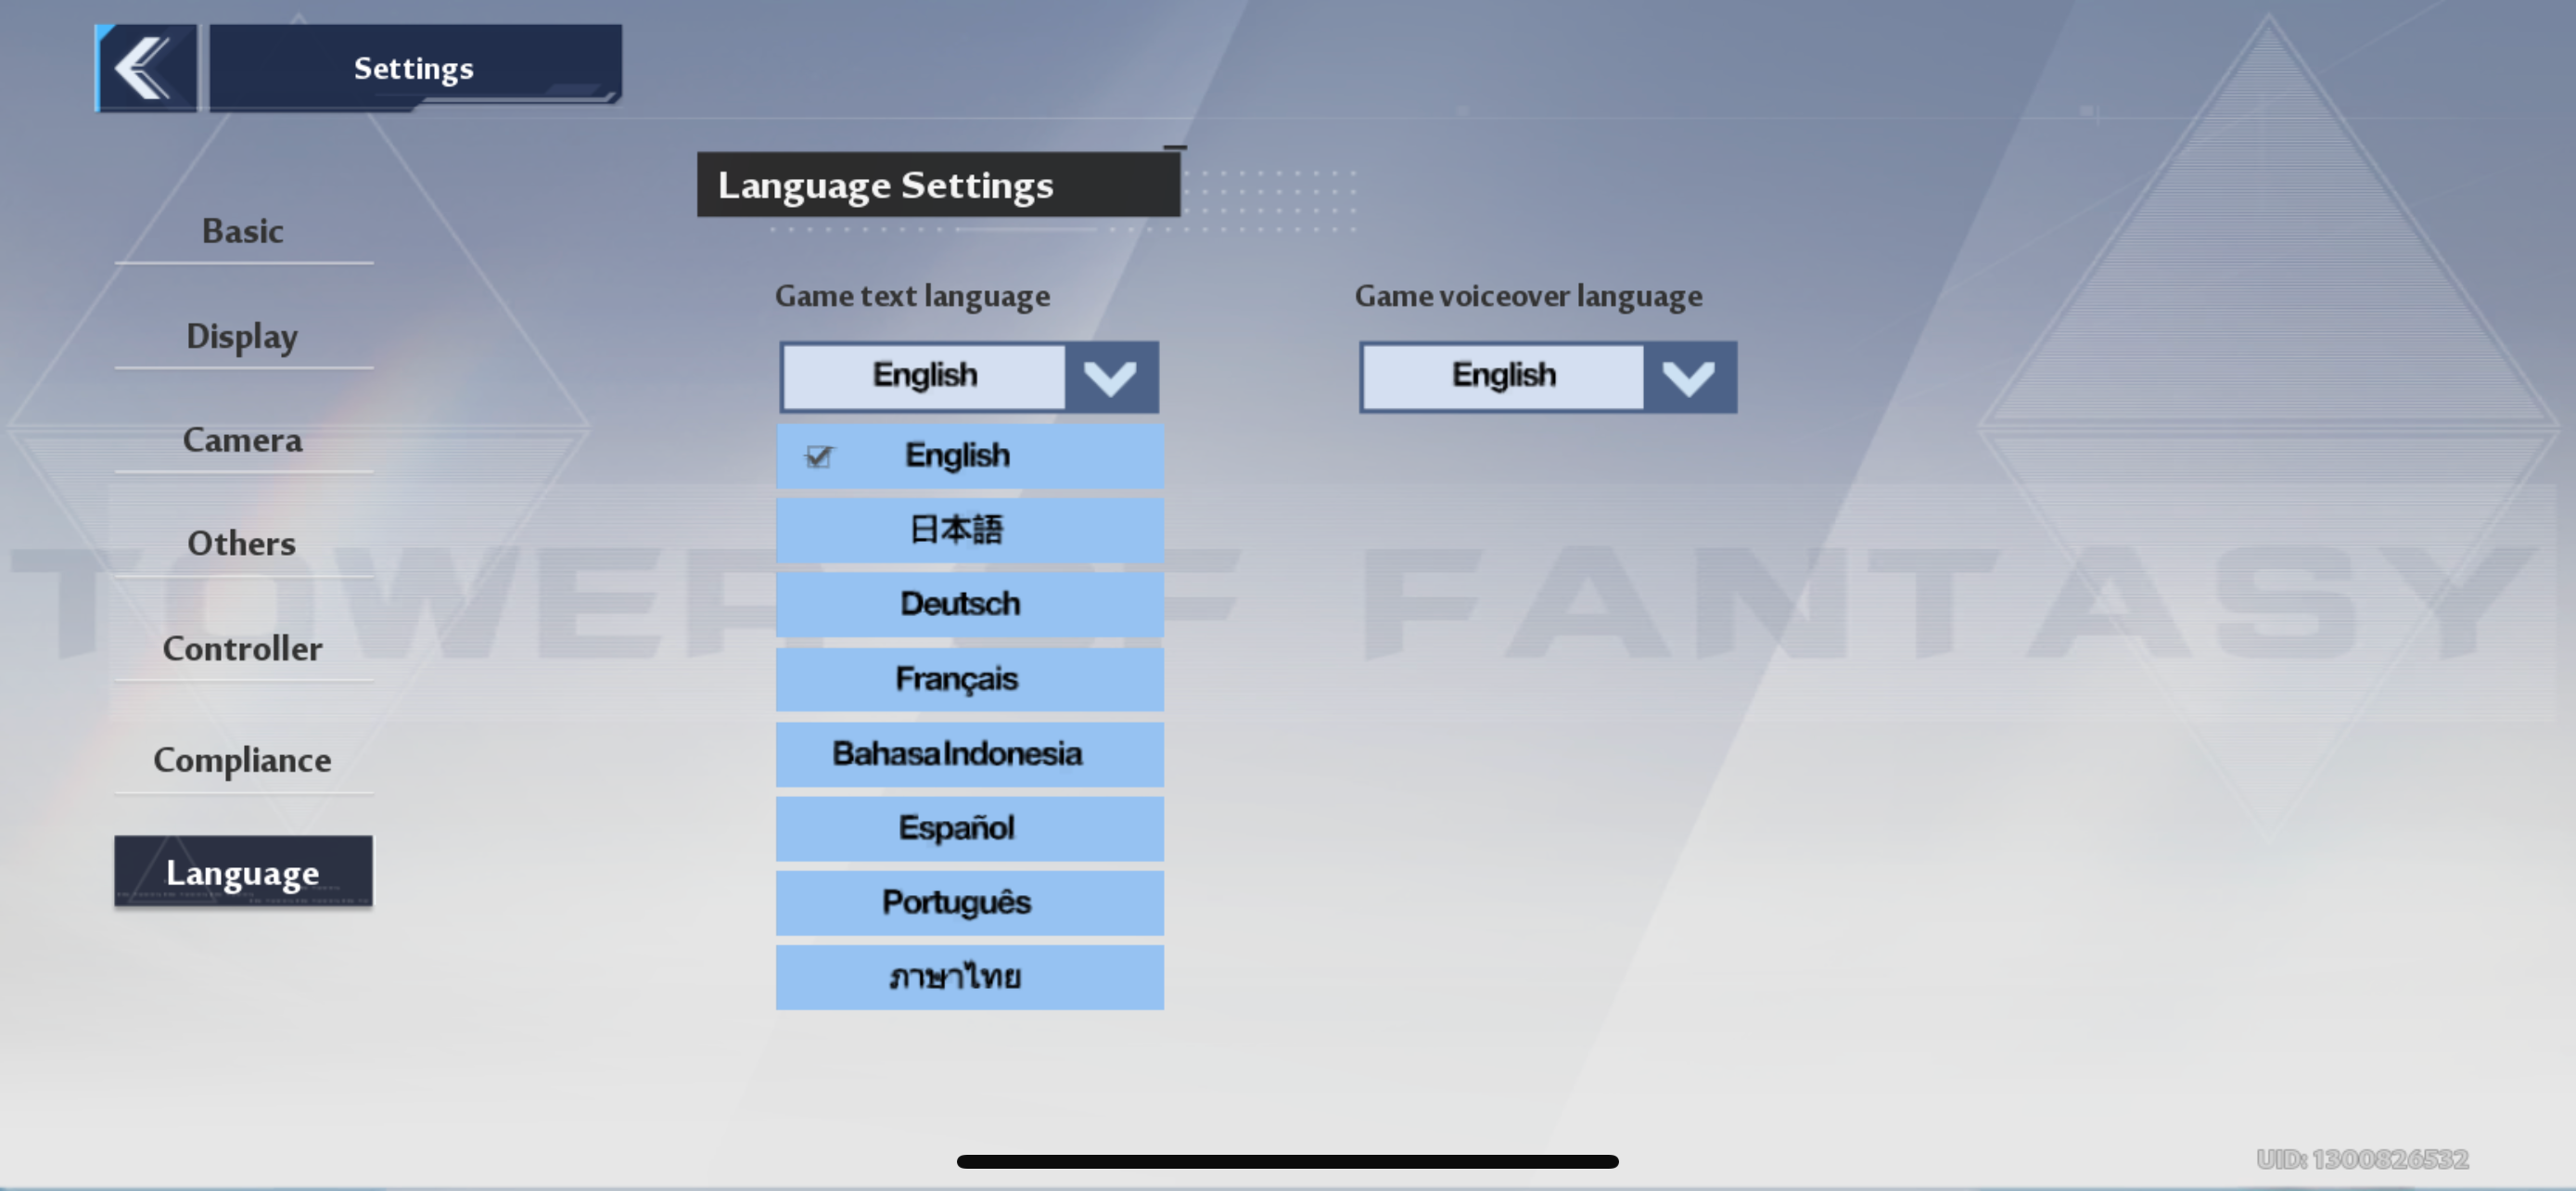 The language settings menu for Tower of Fantasy is shown.